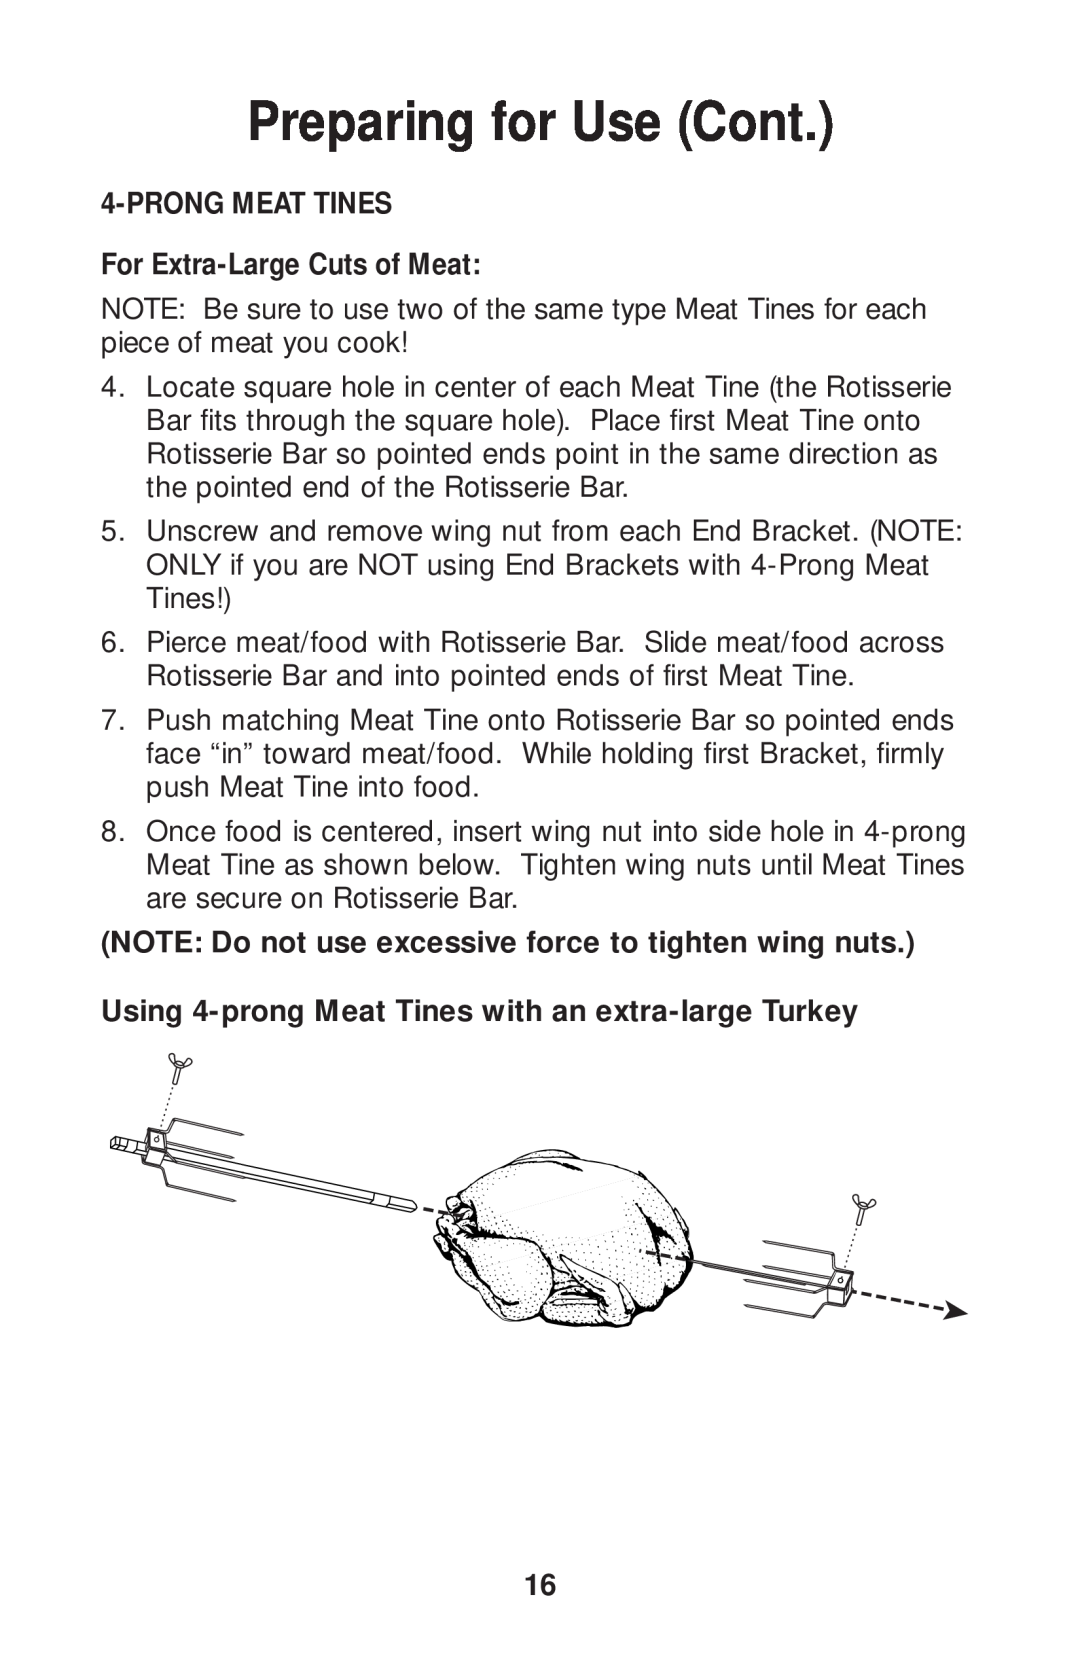 Salton GR80B owner manual PRONGMEAT TINES For Extra-LargeCuts of Meat, Preparing for Use Cont 